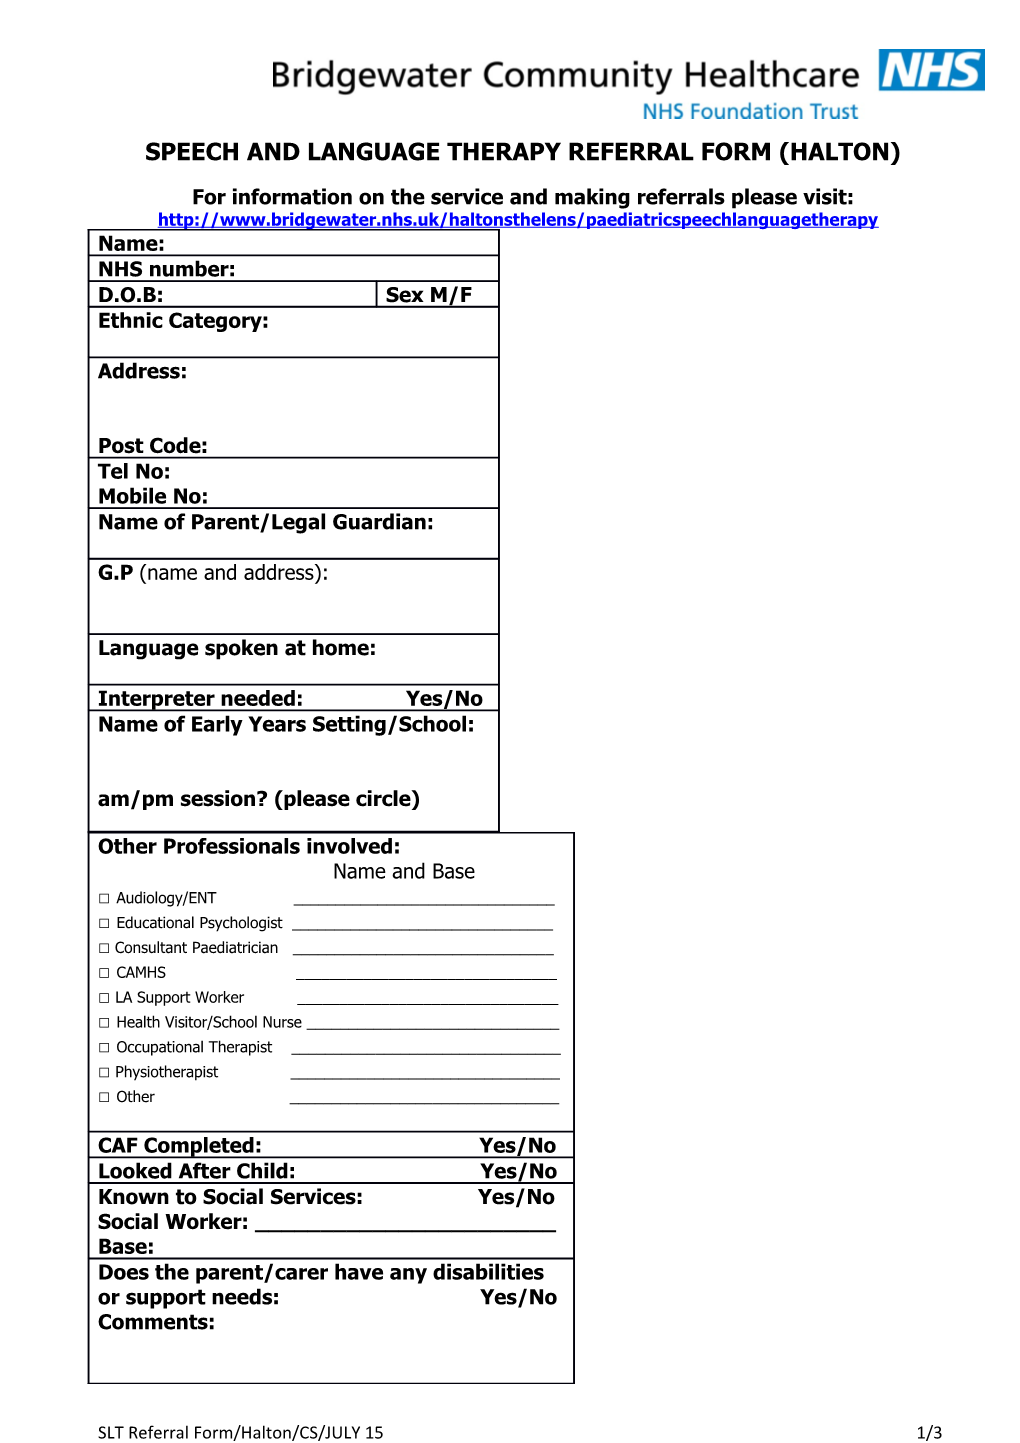 Speech and Language Therapy Referral Form (Halton)